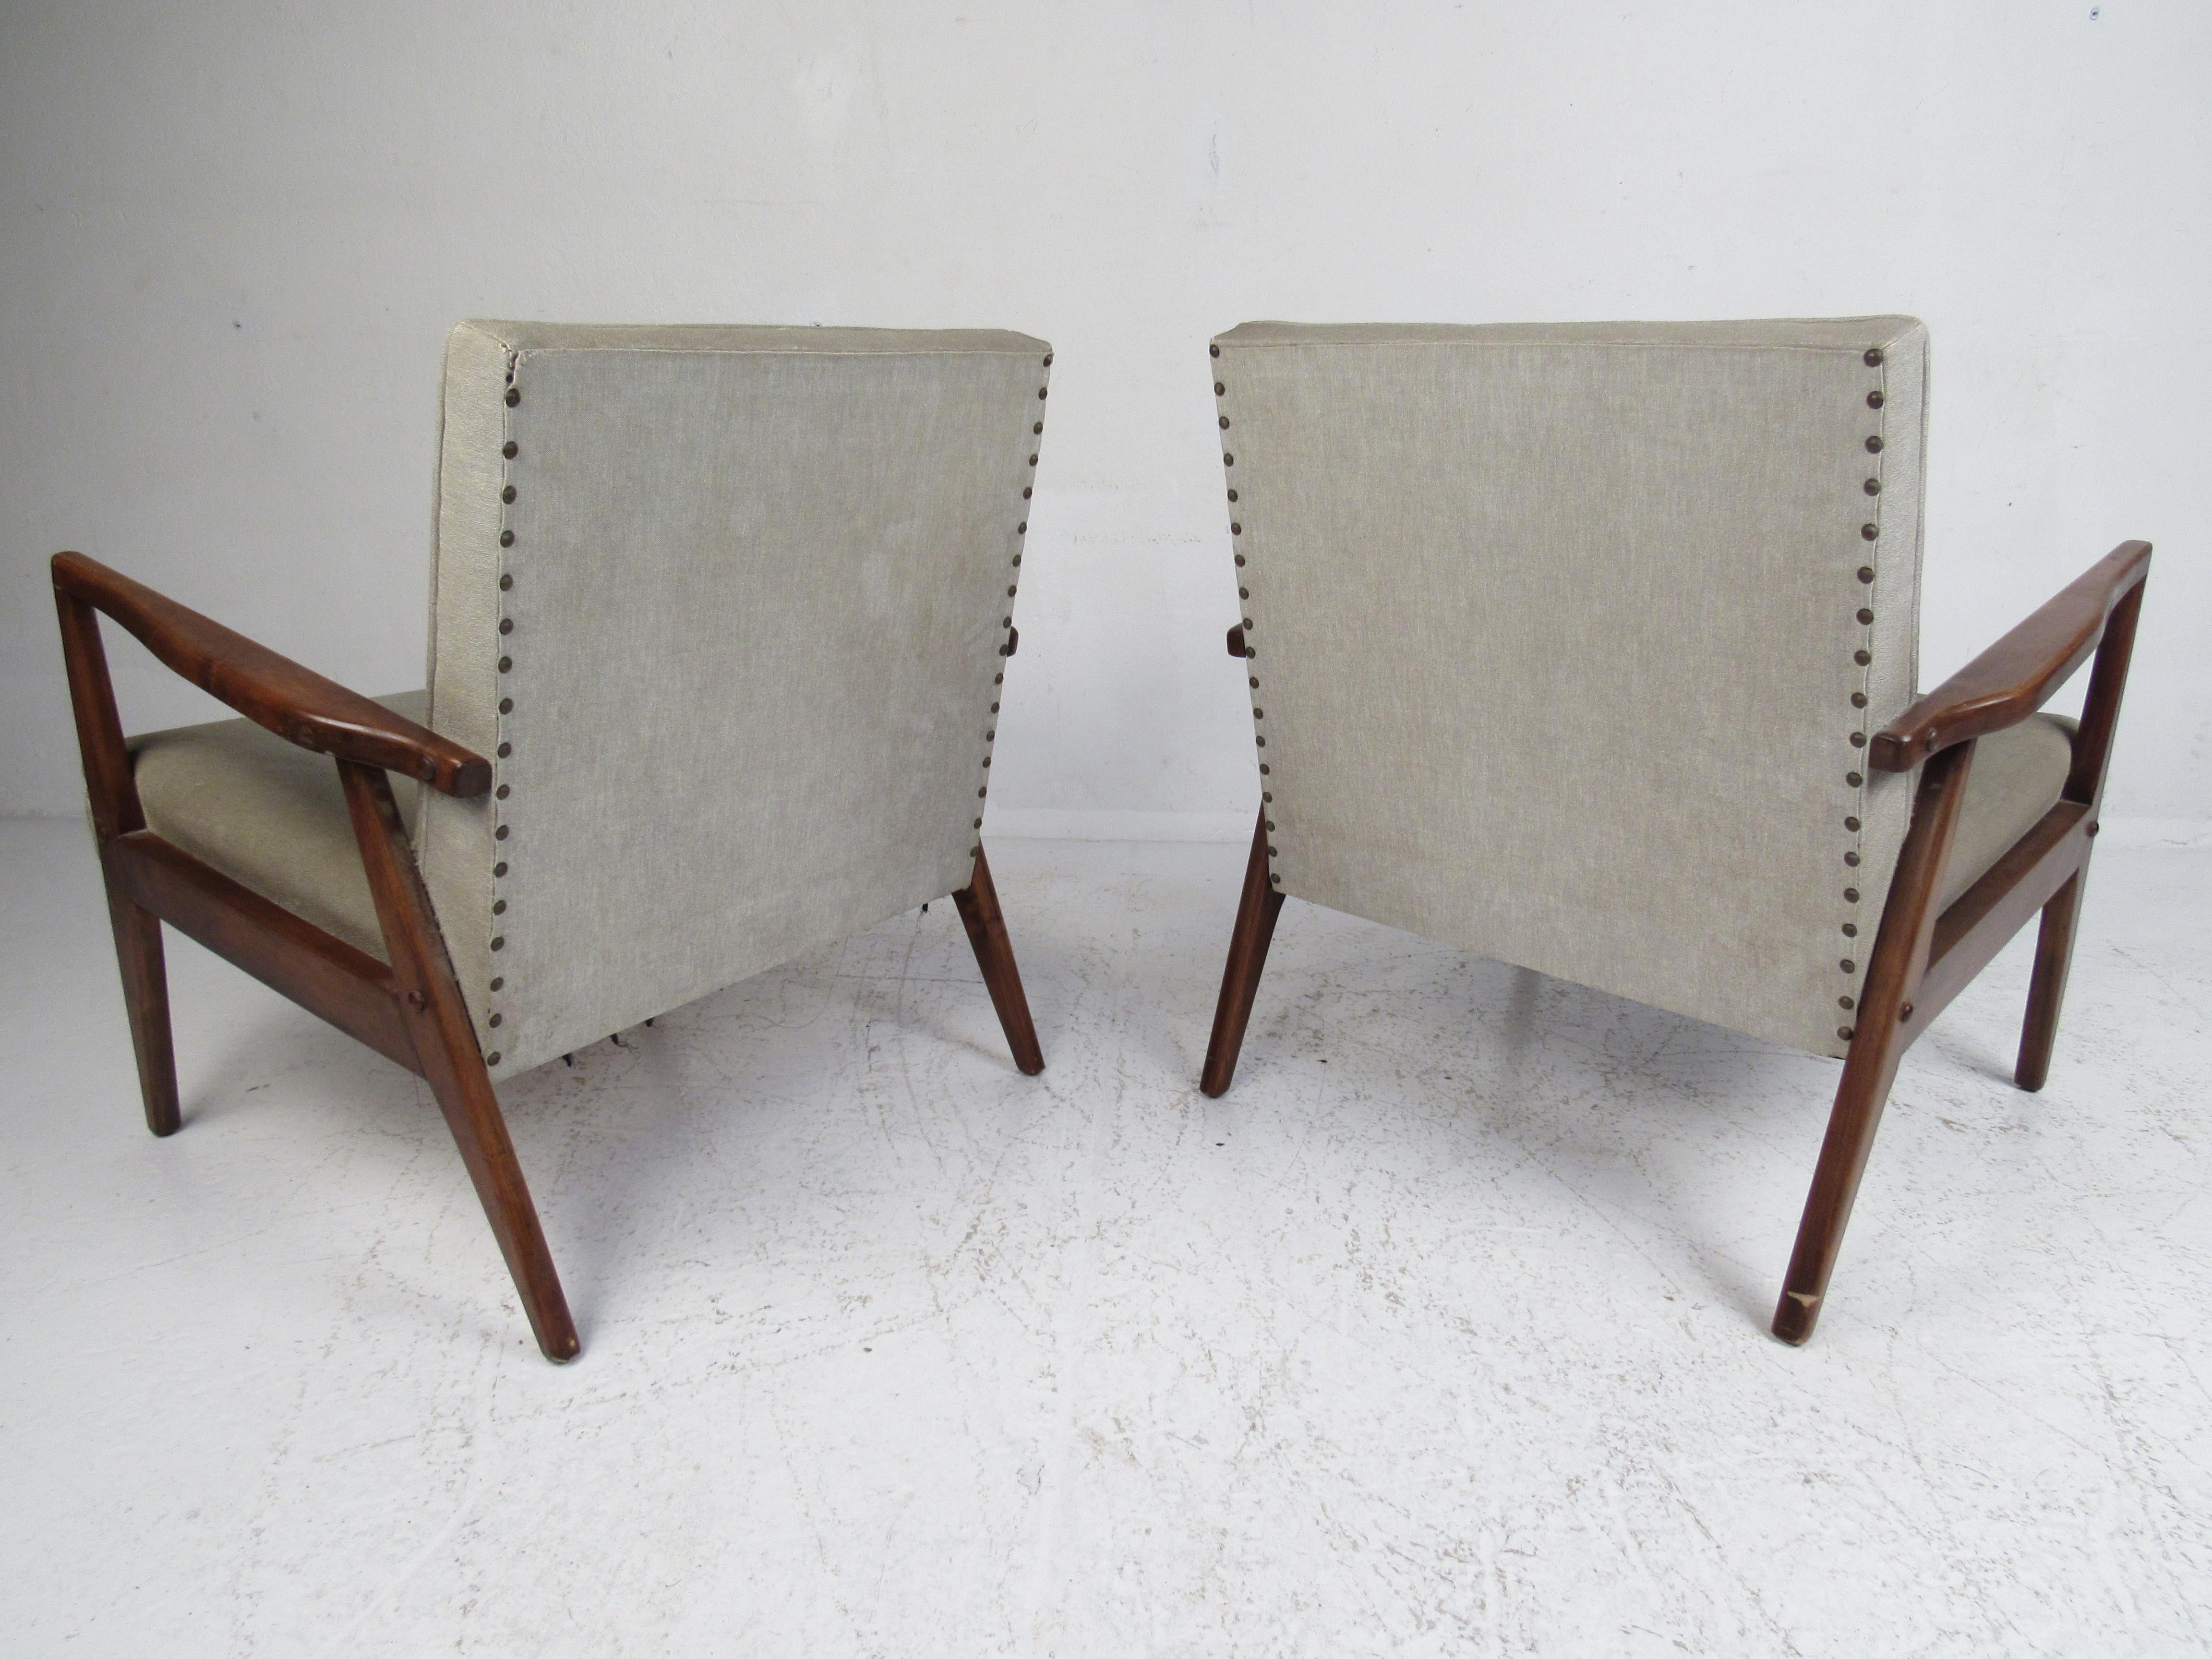 Pair of Mid-Century Modern Italian Lounge Chairs In Good Condition For Sale In Brooklyn, NY